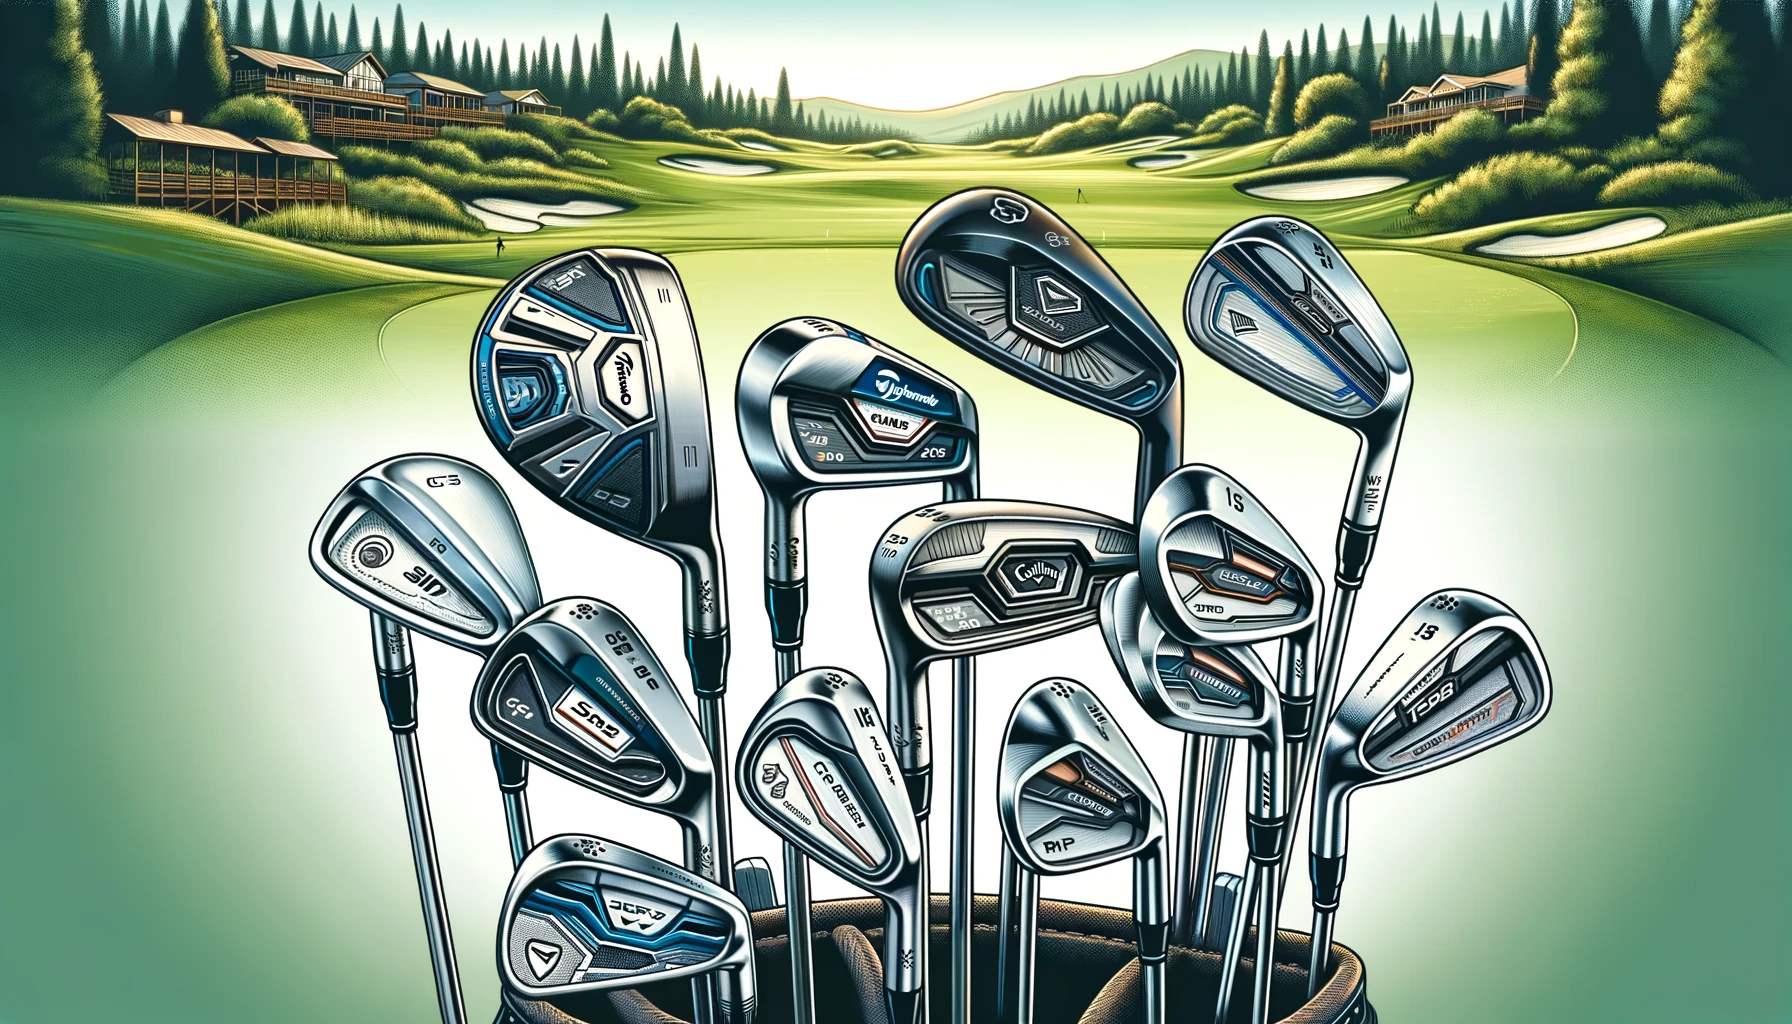 Best Irons for MID to HIGH Handicap